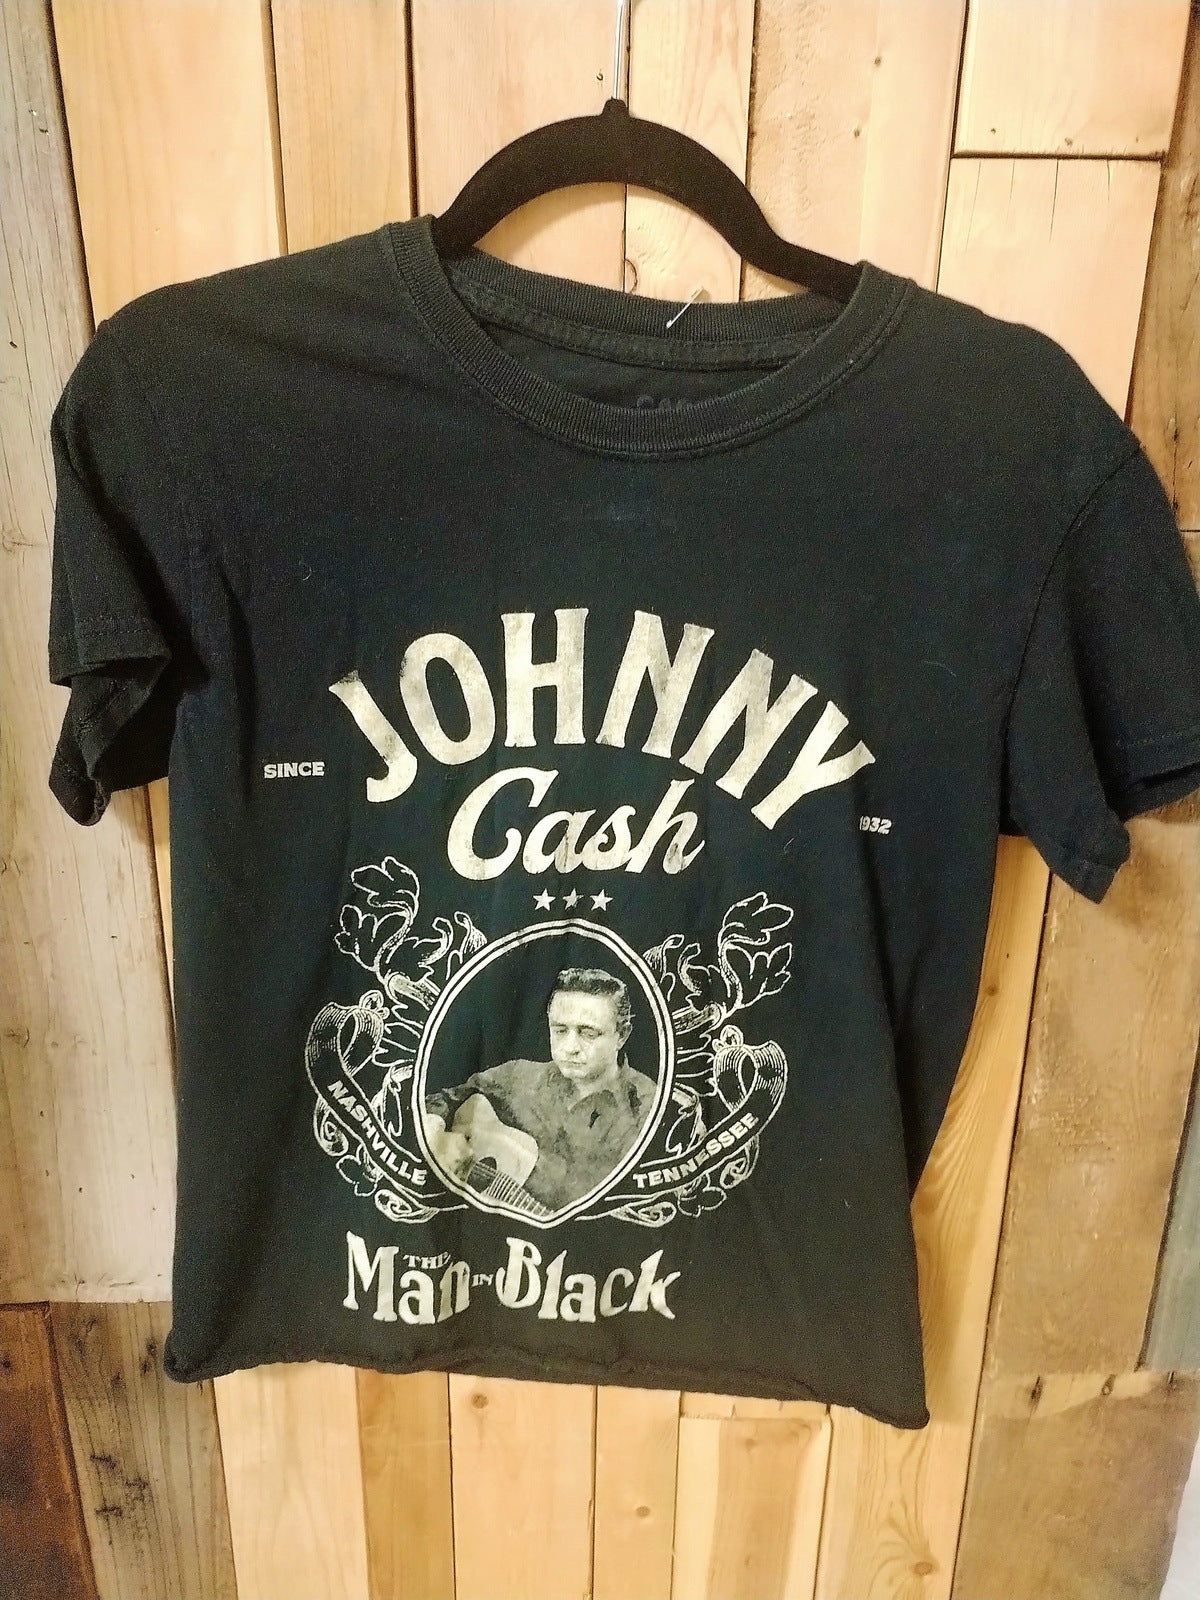 Johnny Cash Tee Shirt Size Small